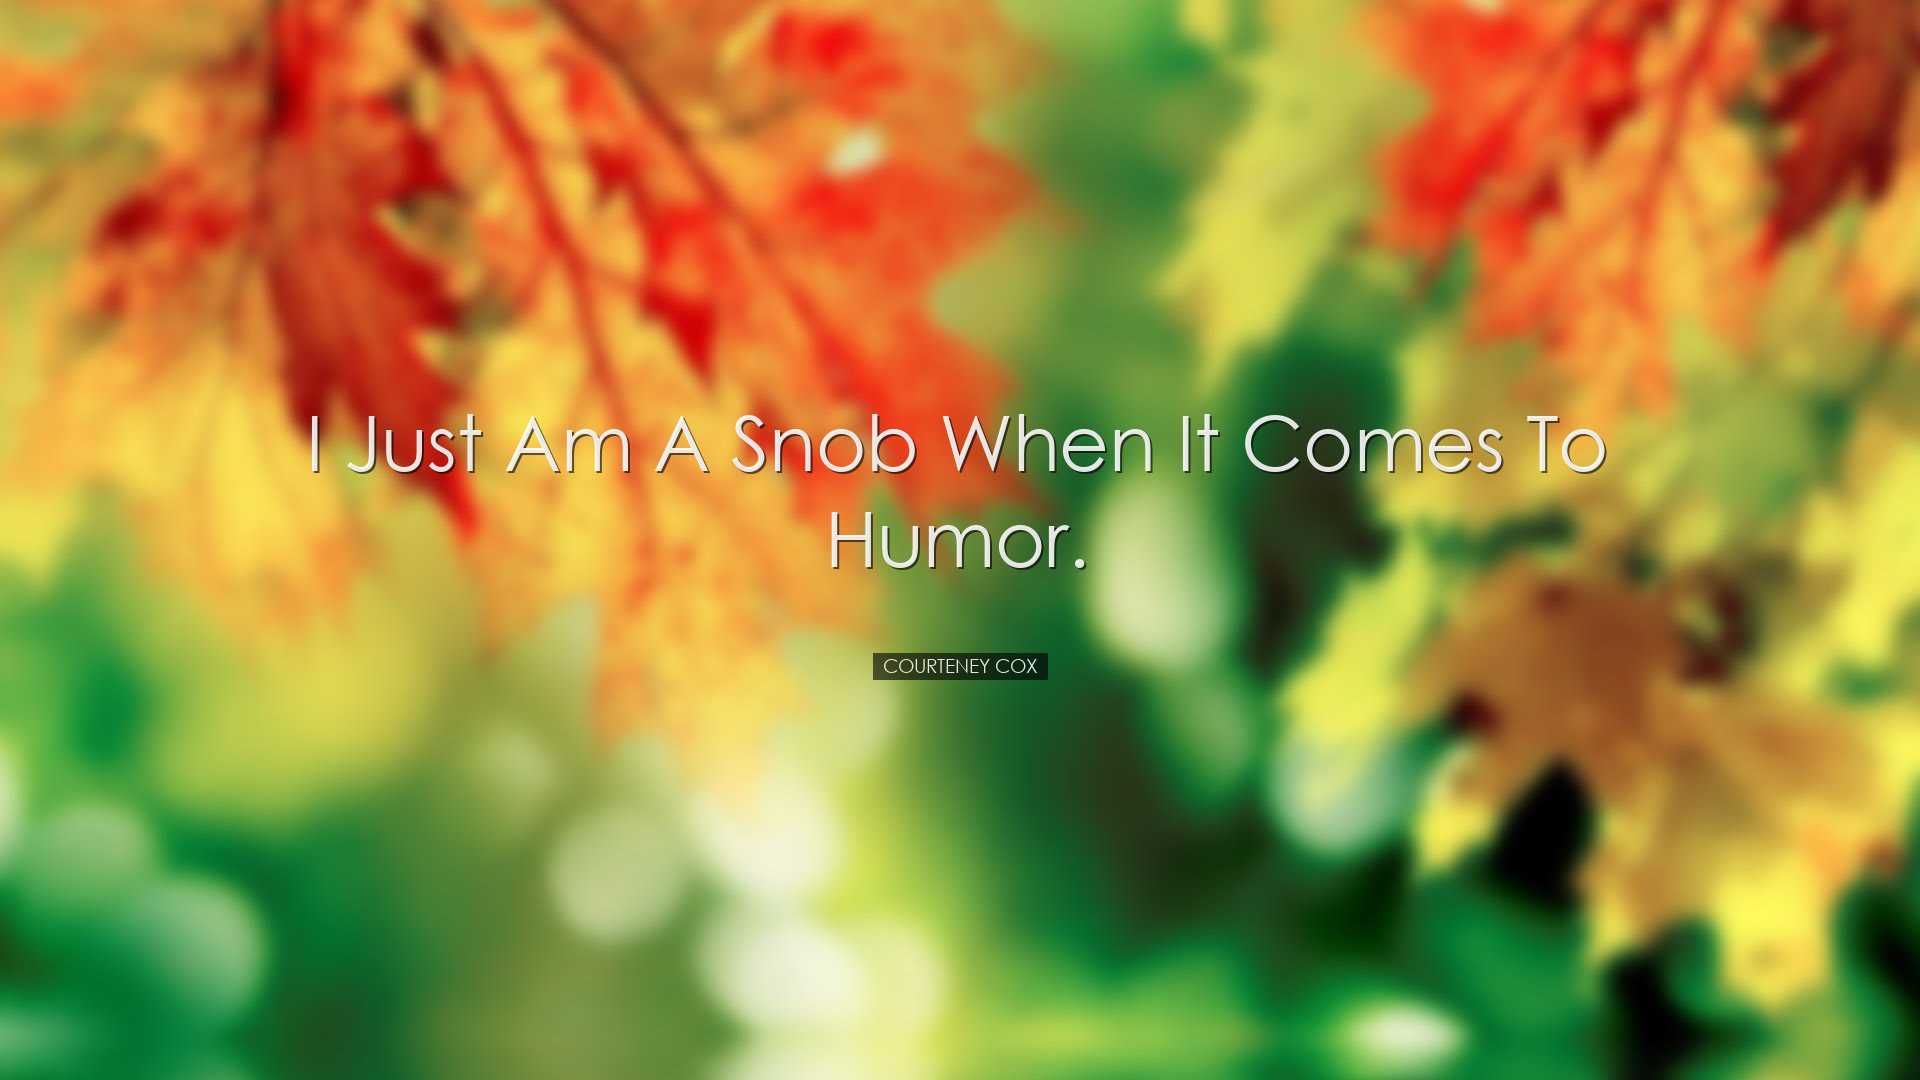 I just am a snob when it comes to humor. - Courteney Cox